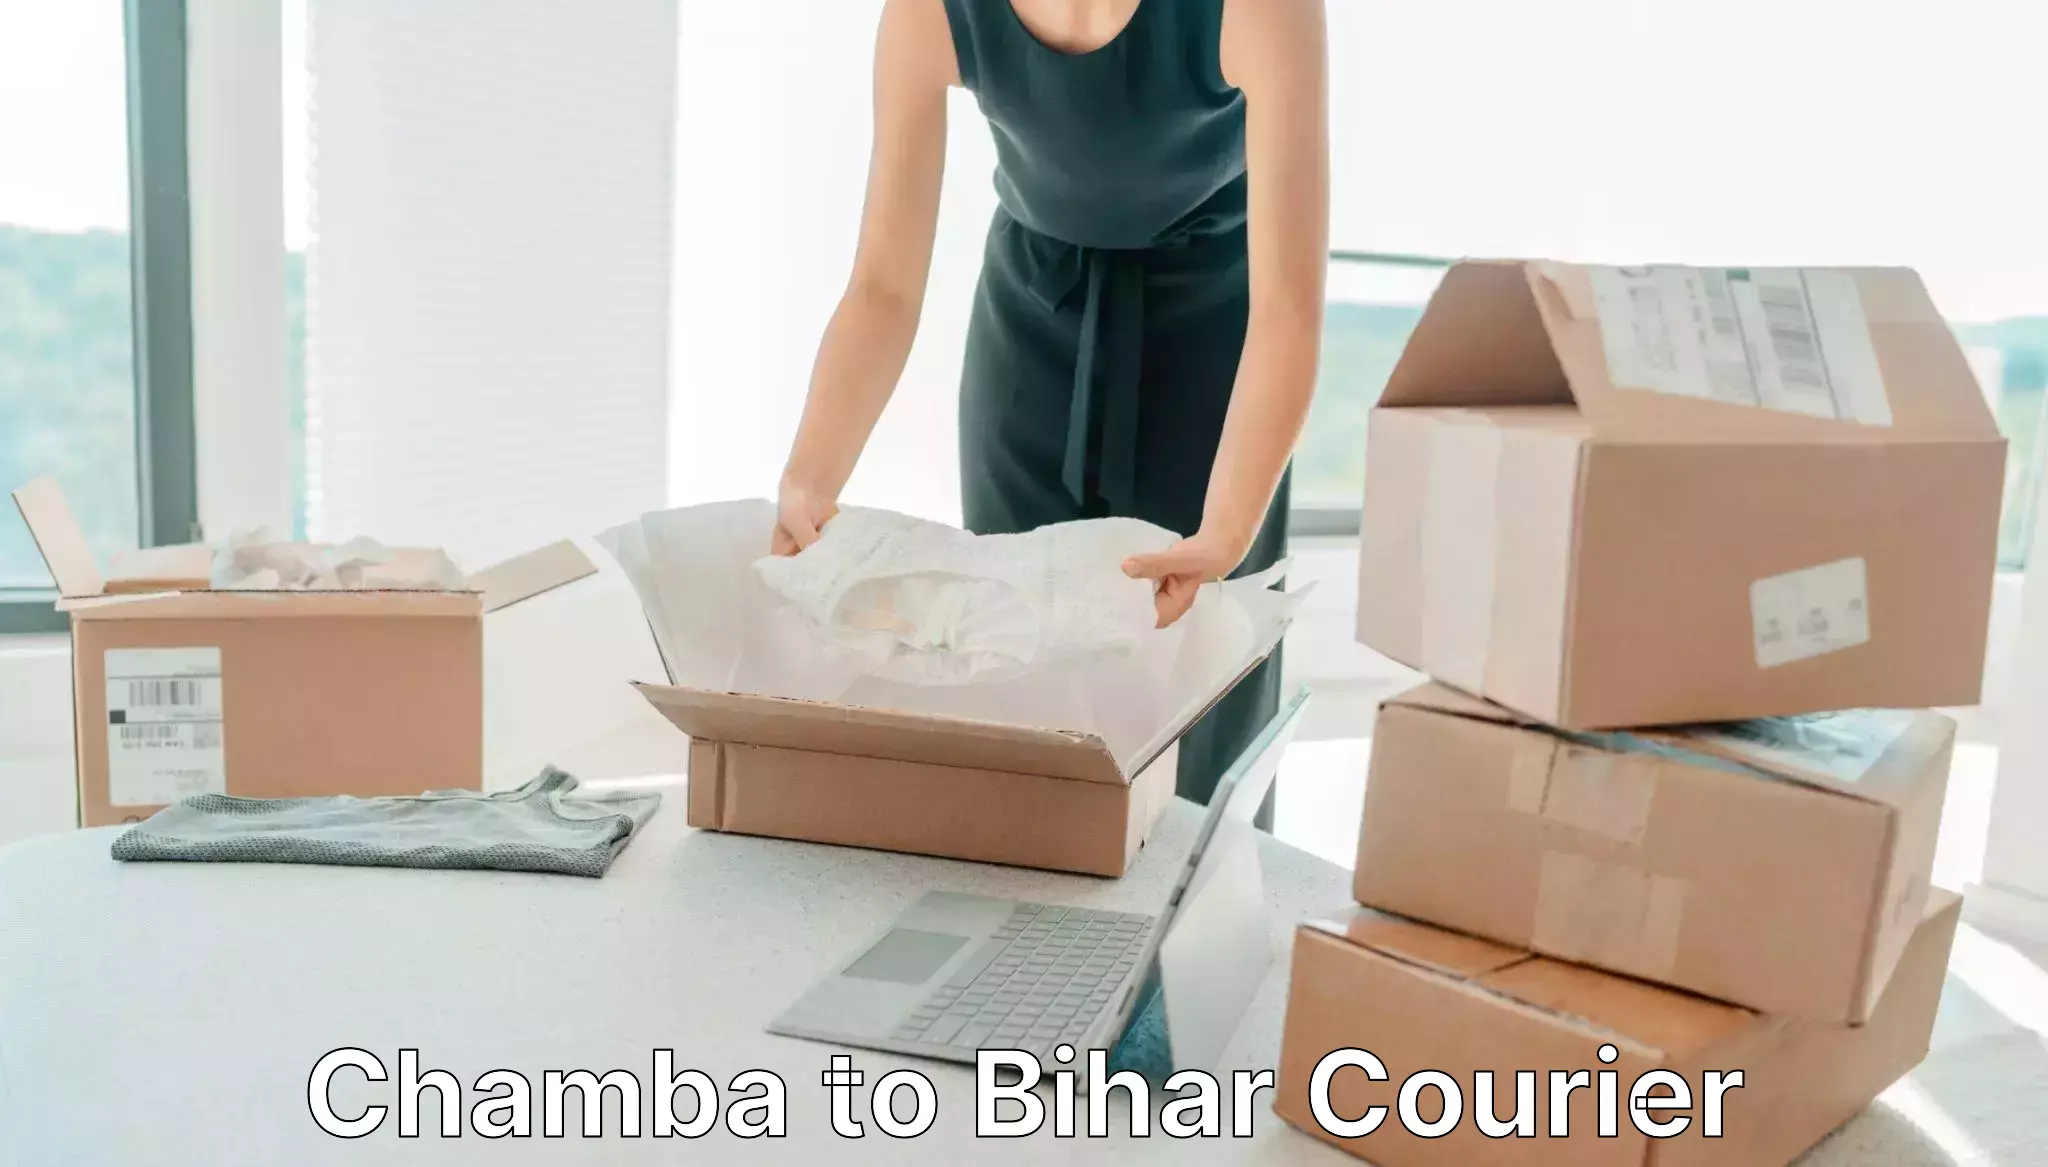 Courier service partnerships Chamba to Araria